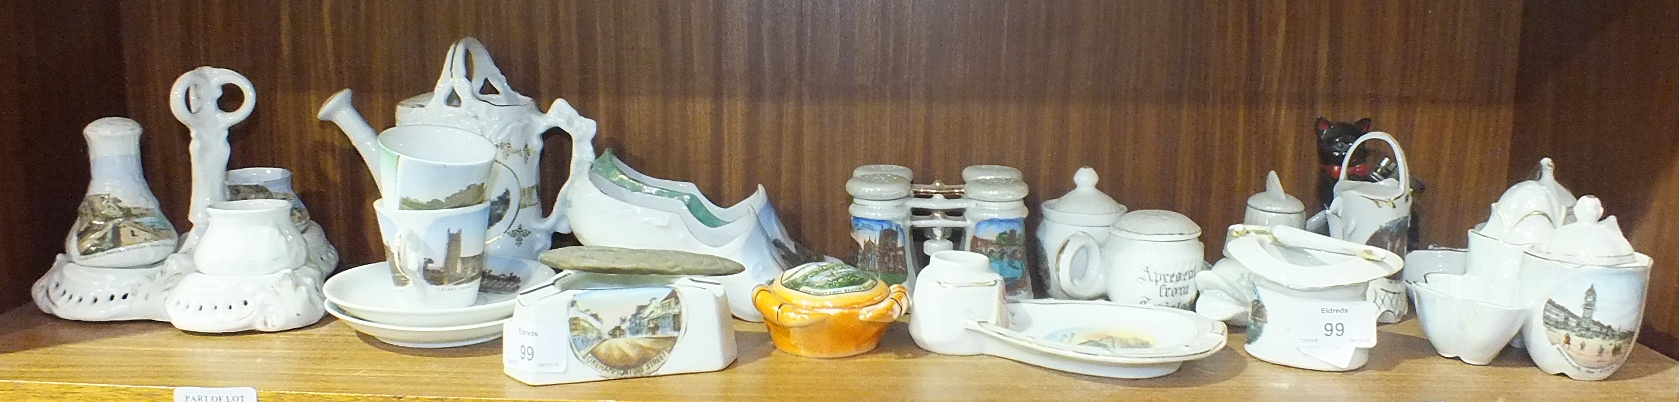 A collection of late-19th/early-20th century ceramic souvenir ware, including an ash tray with